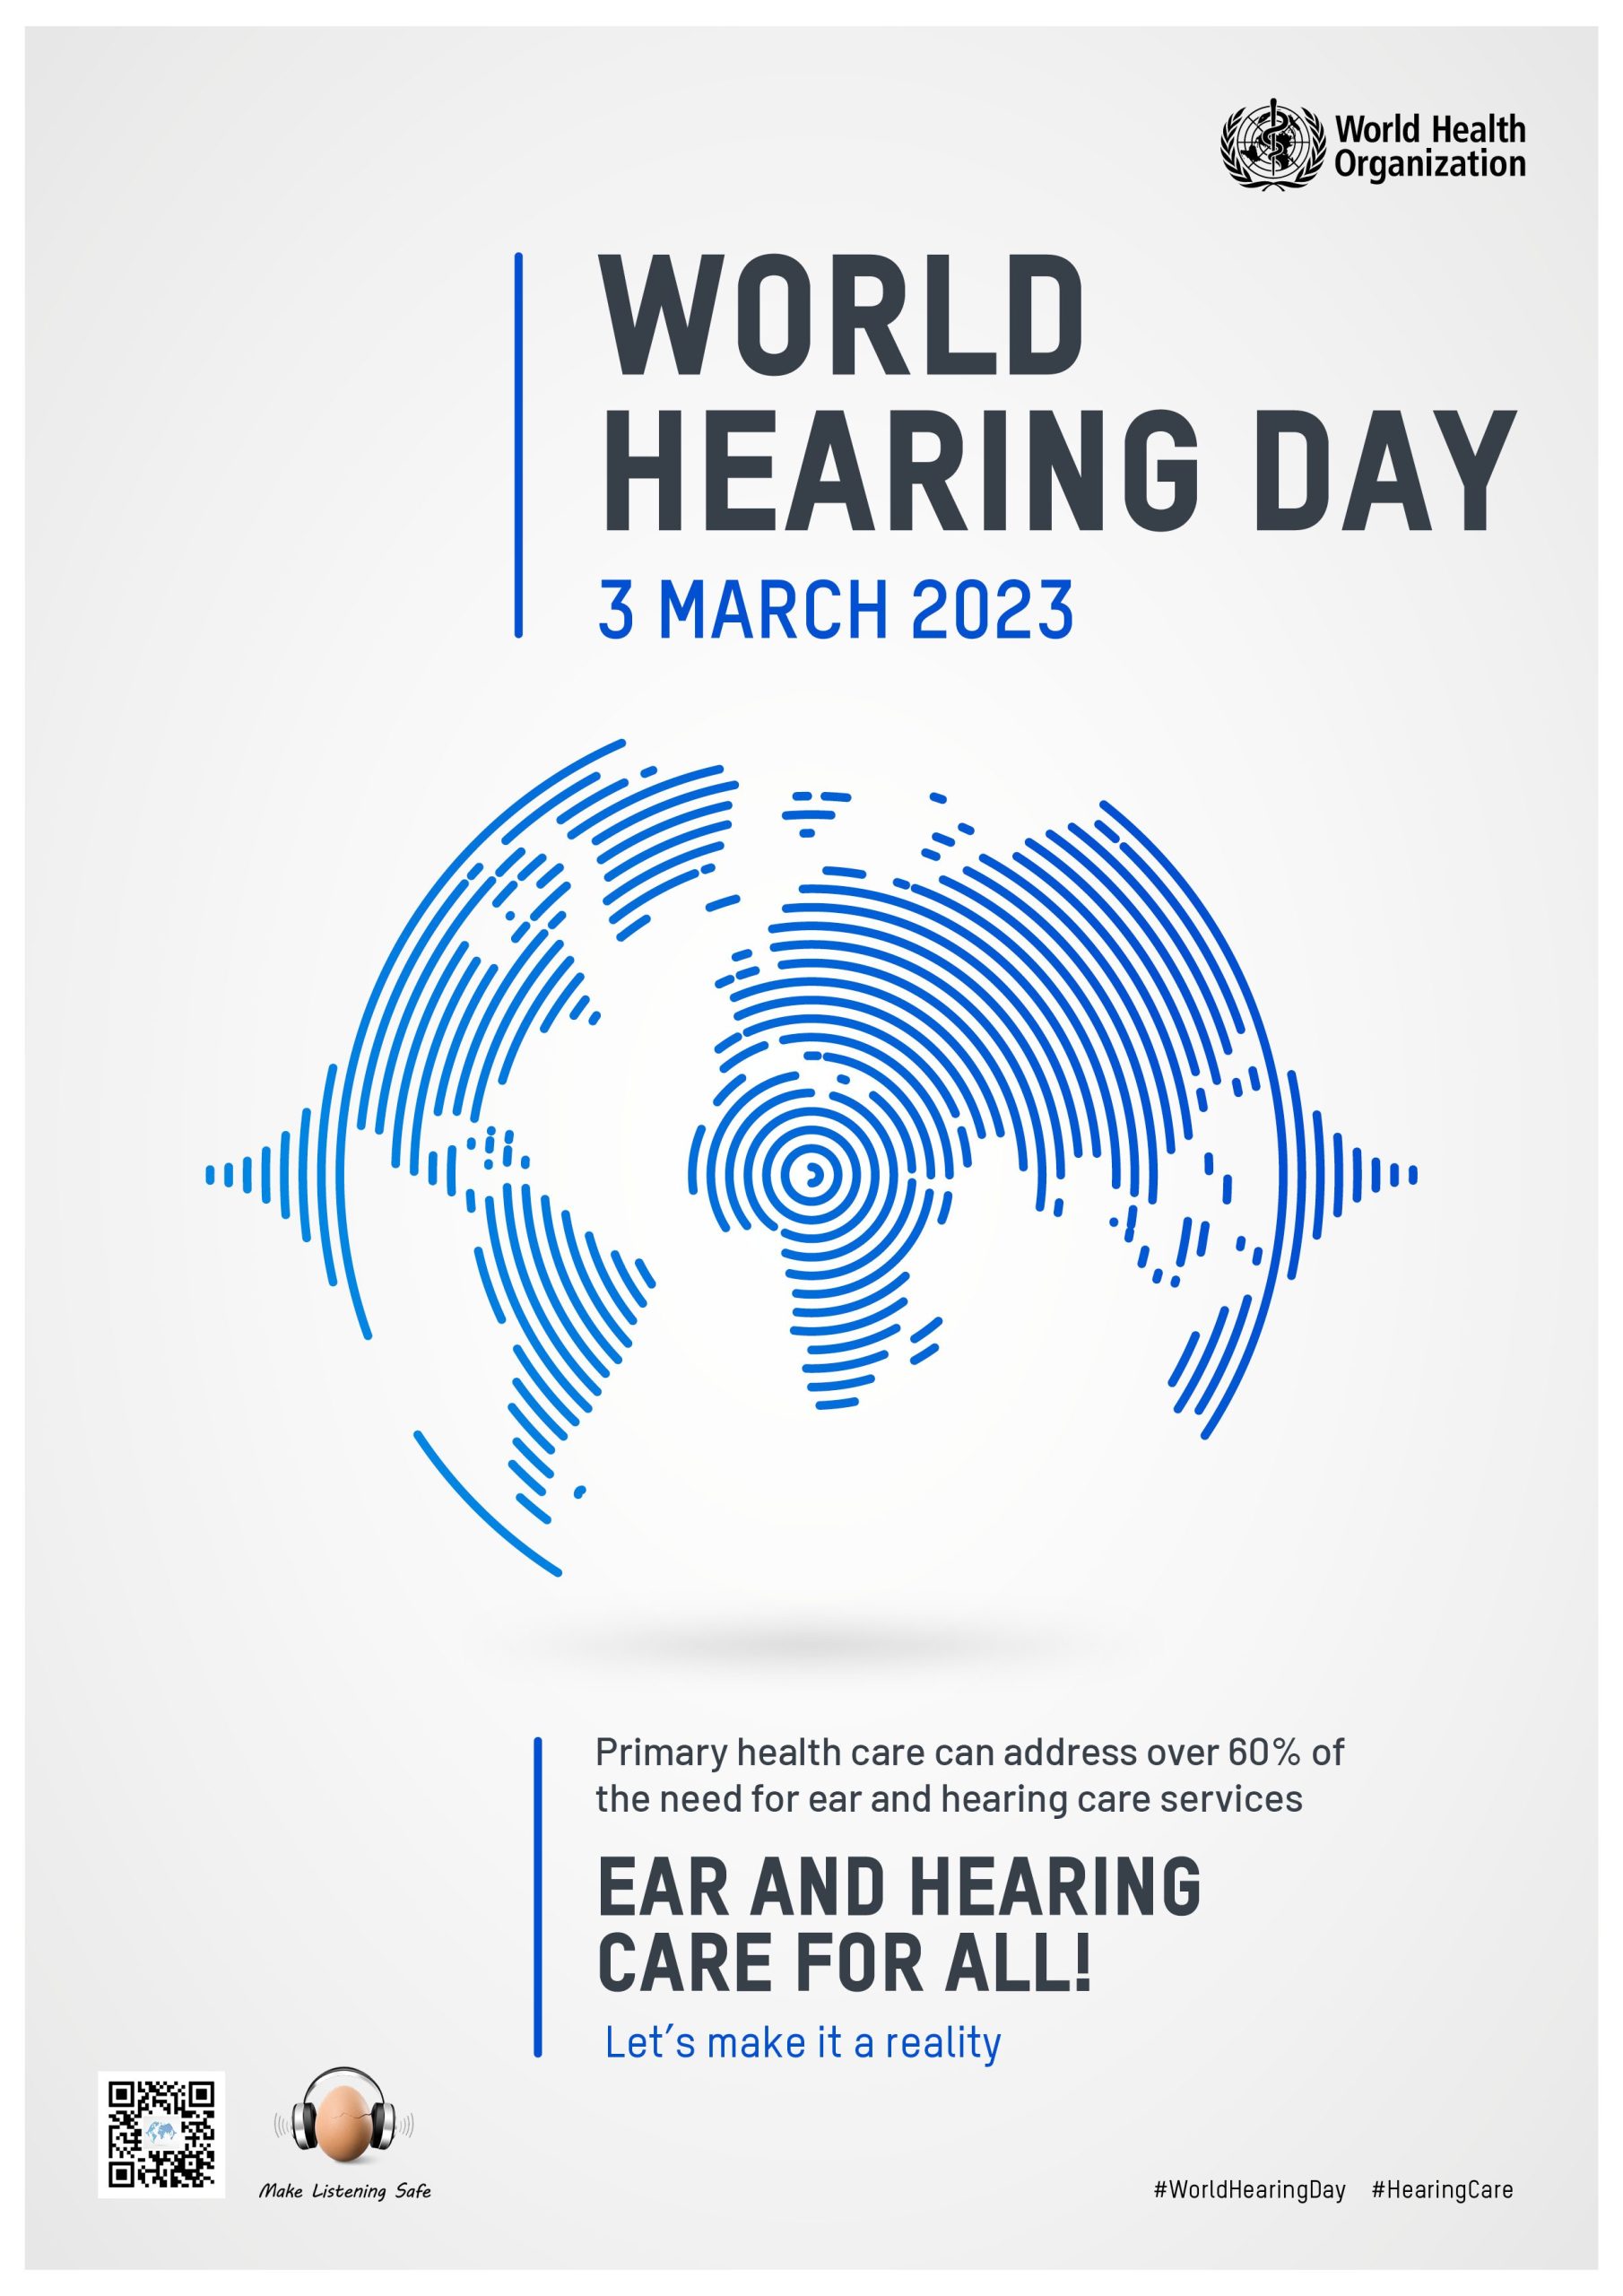 World Hearing Day is approaching